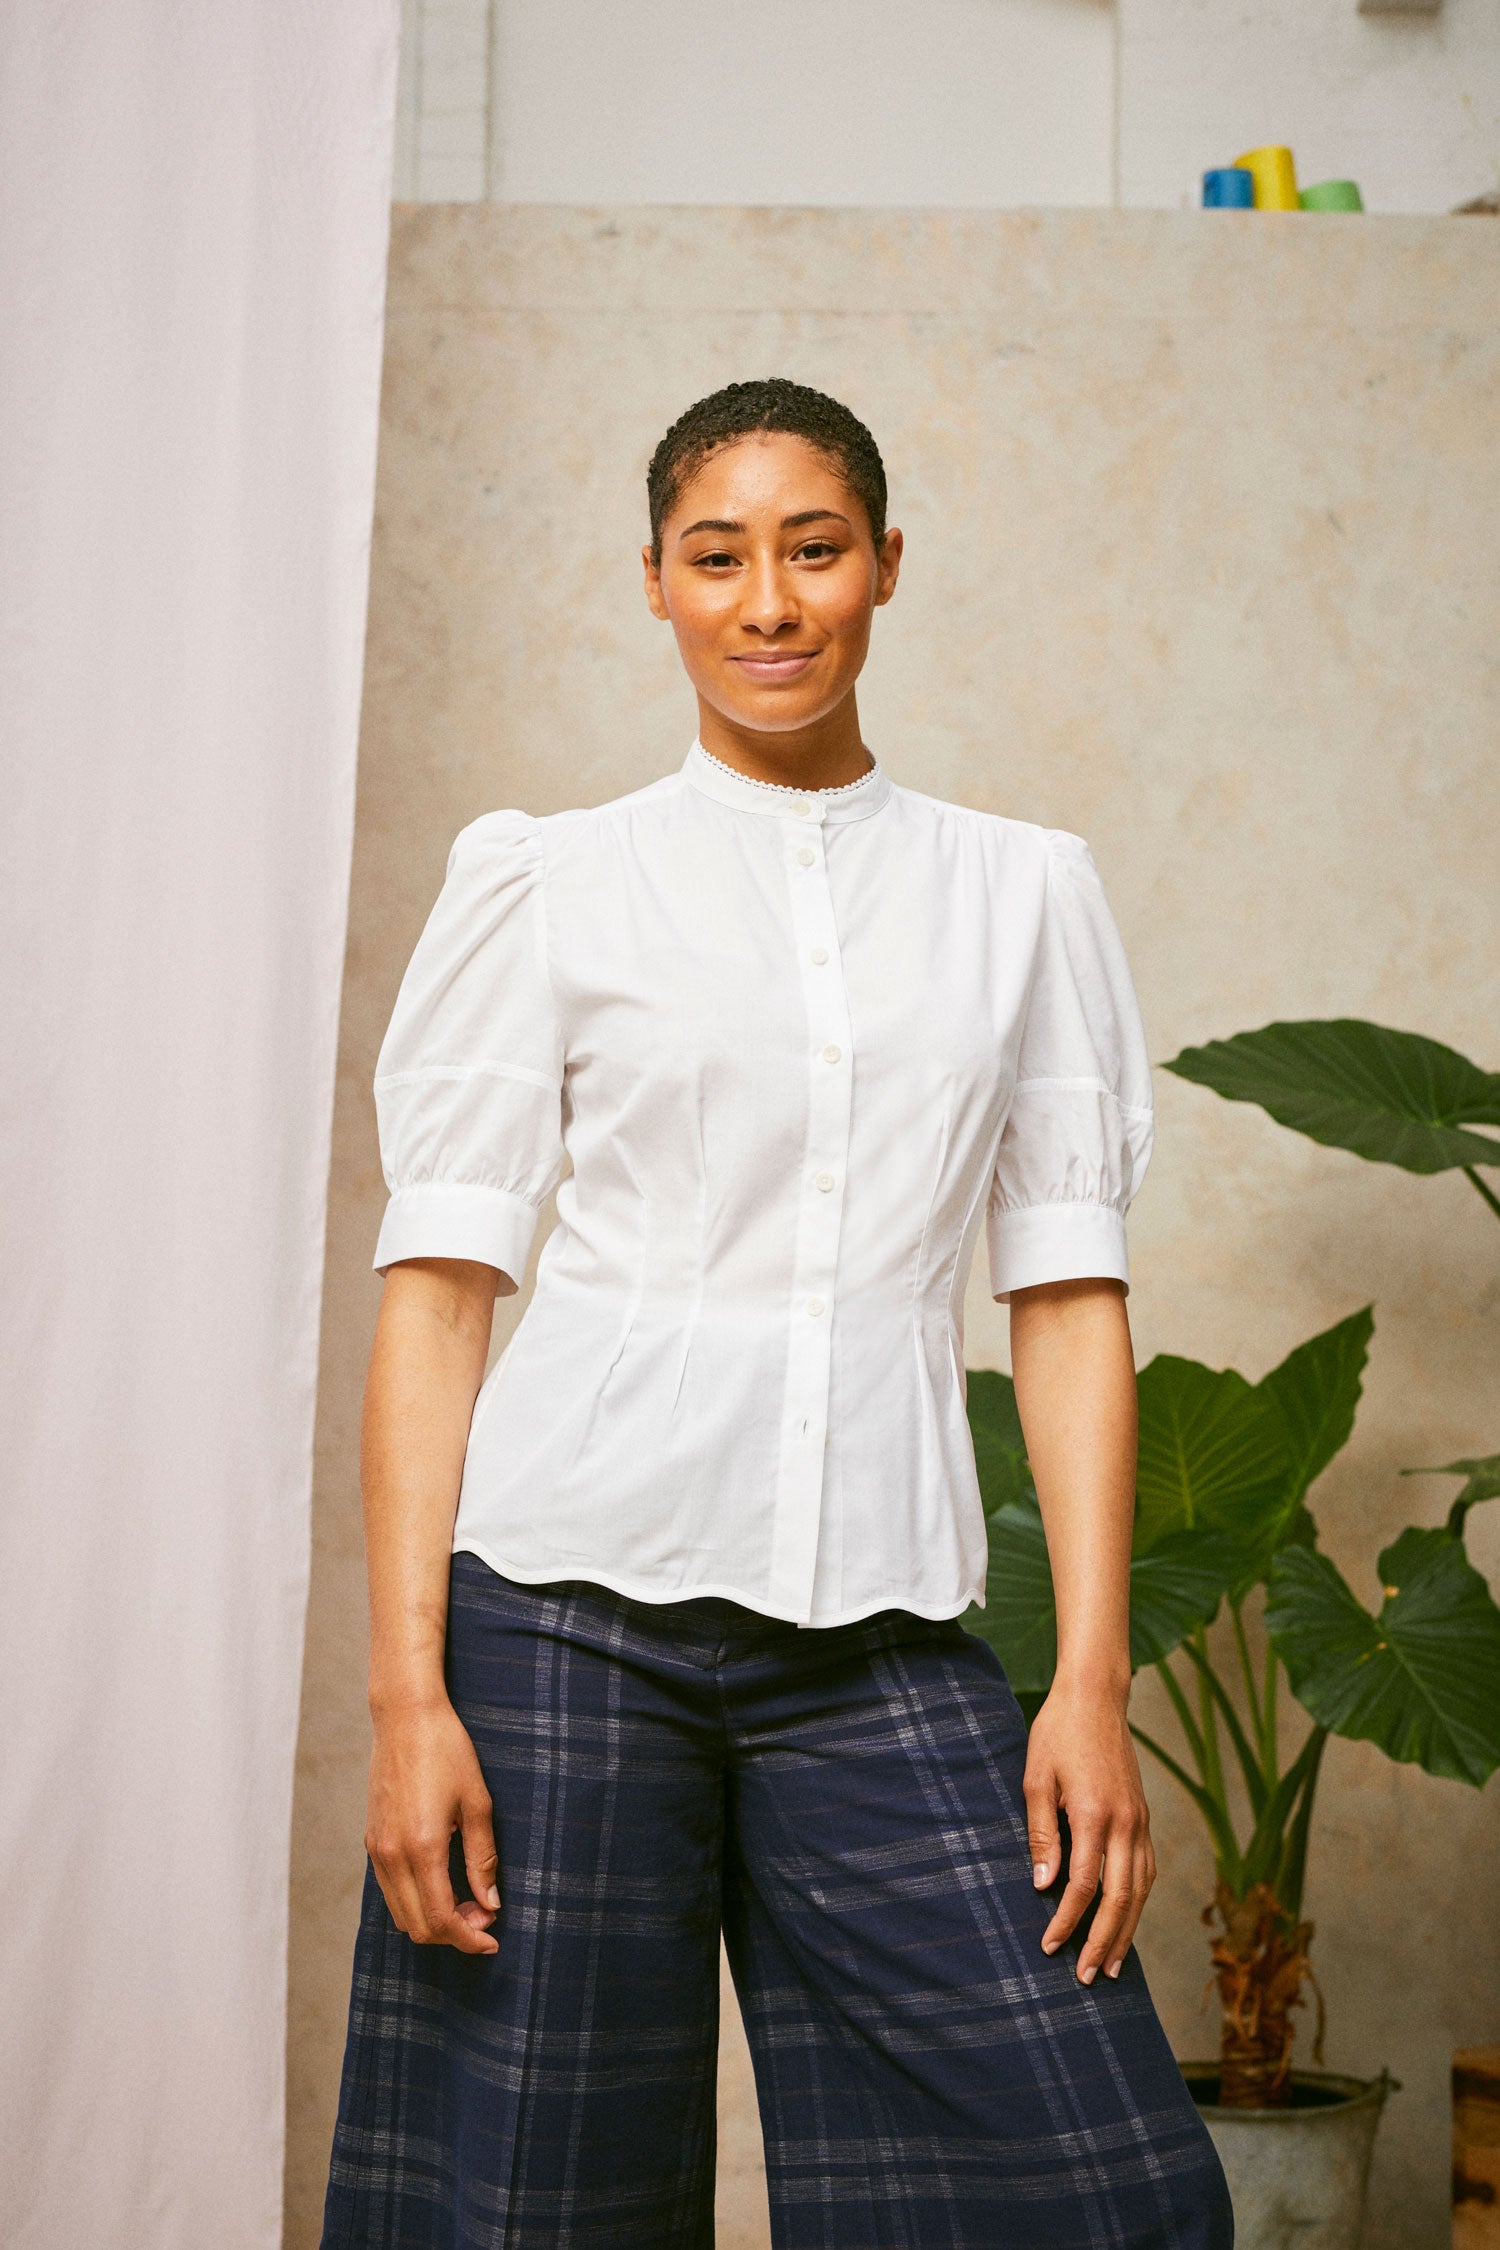 Model stands smiling, wearing Saywood's Joni puff sleeve blouse in white with scalloped hem, worn with navy check Amelia wide leg trousers. A plant and drop of pink fabric can be seen in the background.